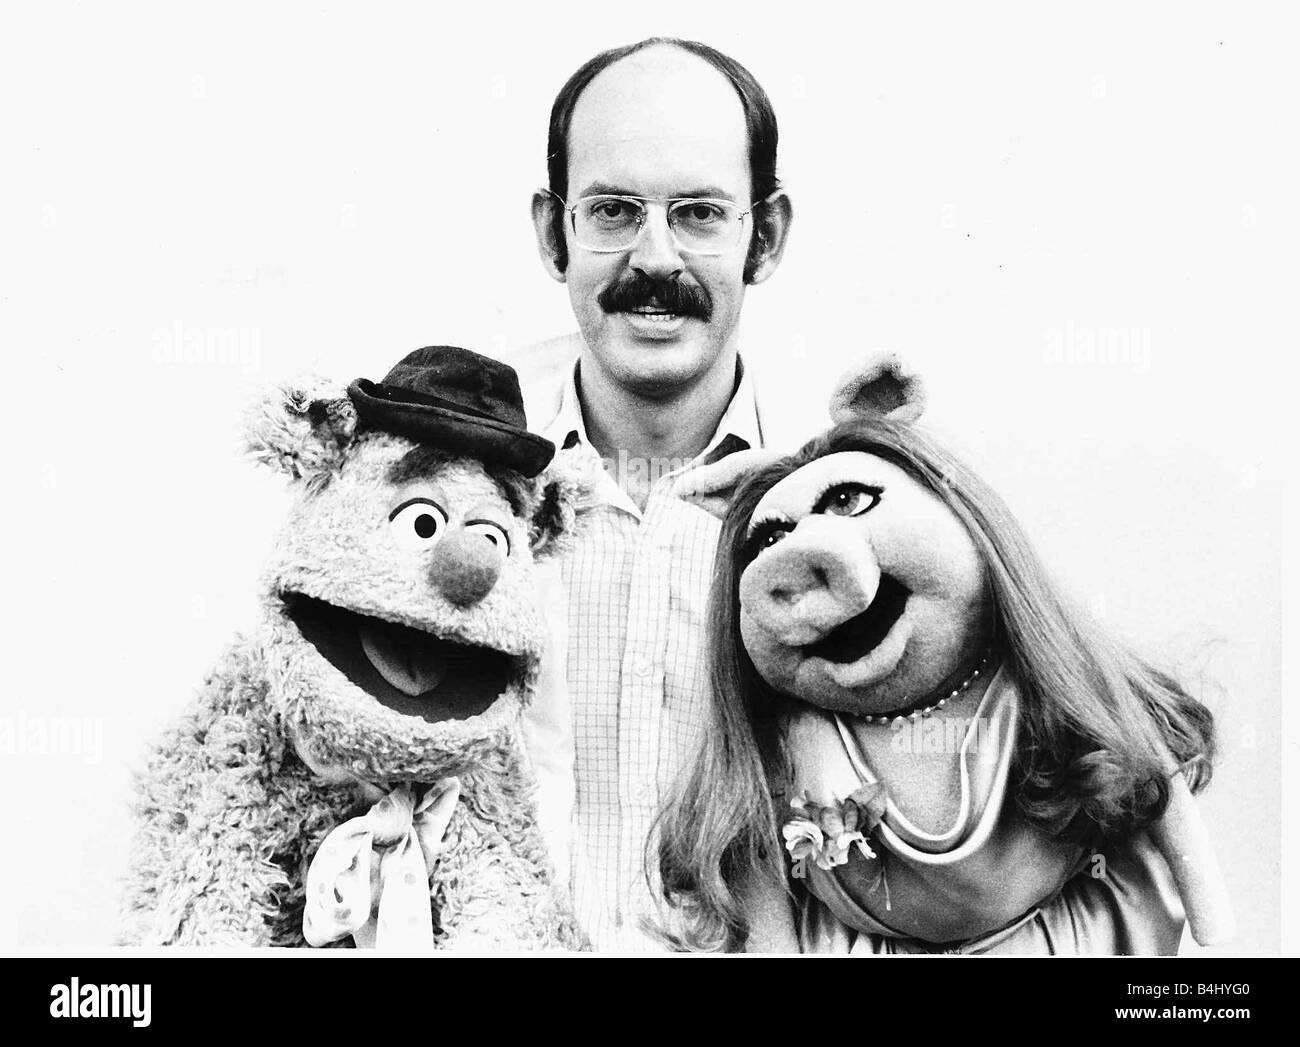 TV Progs The Muppet Show Puppeteer Frank Oz Actor poses with Muppets Fozzie Bear Miss Piggy August 1977 dbase msi Stock Photo